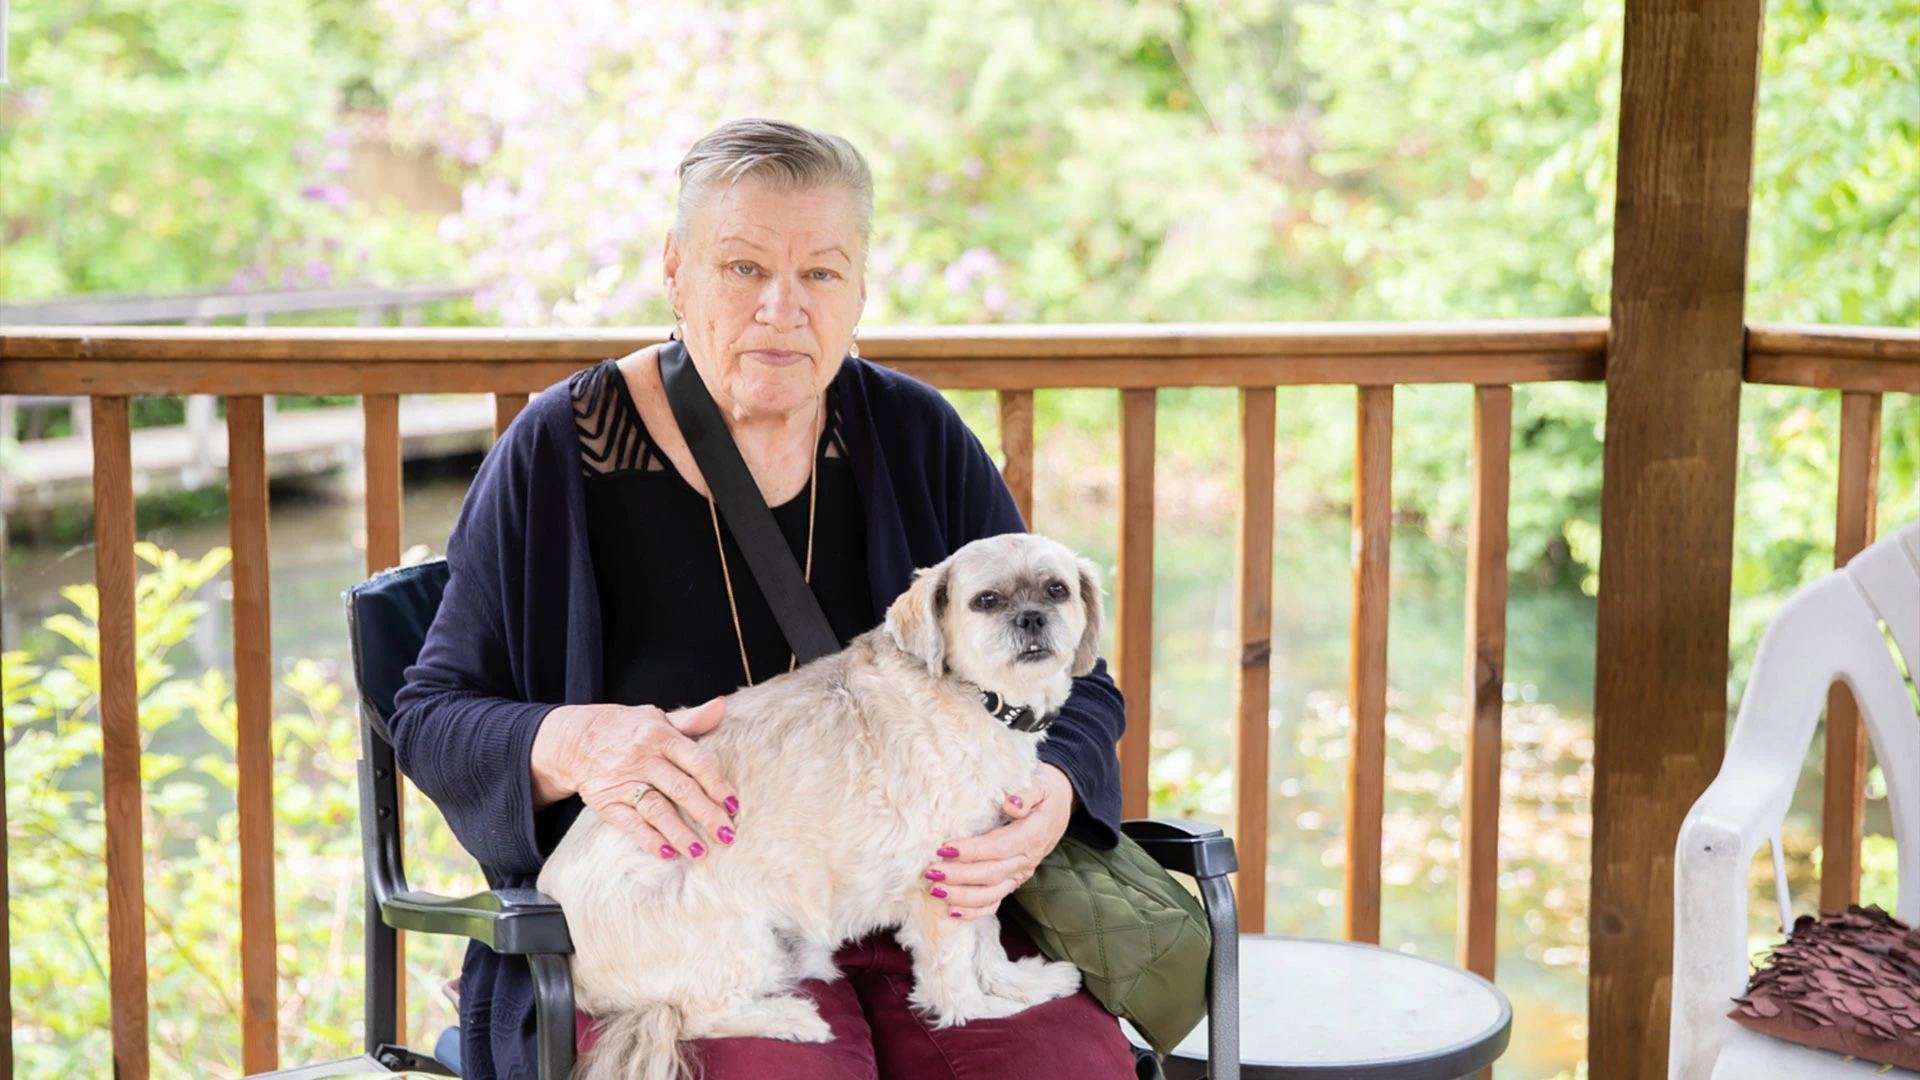 Senior woman sitting in a gazebo with a dog on her lap